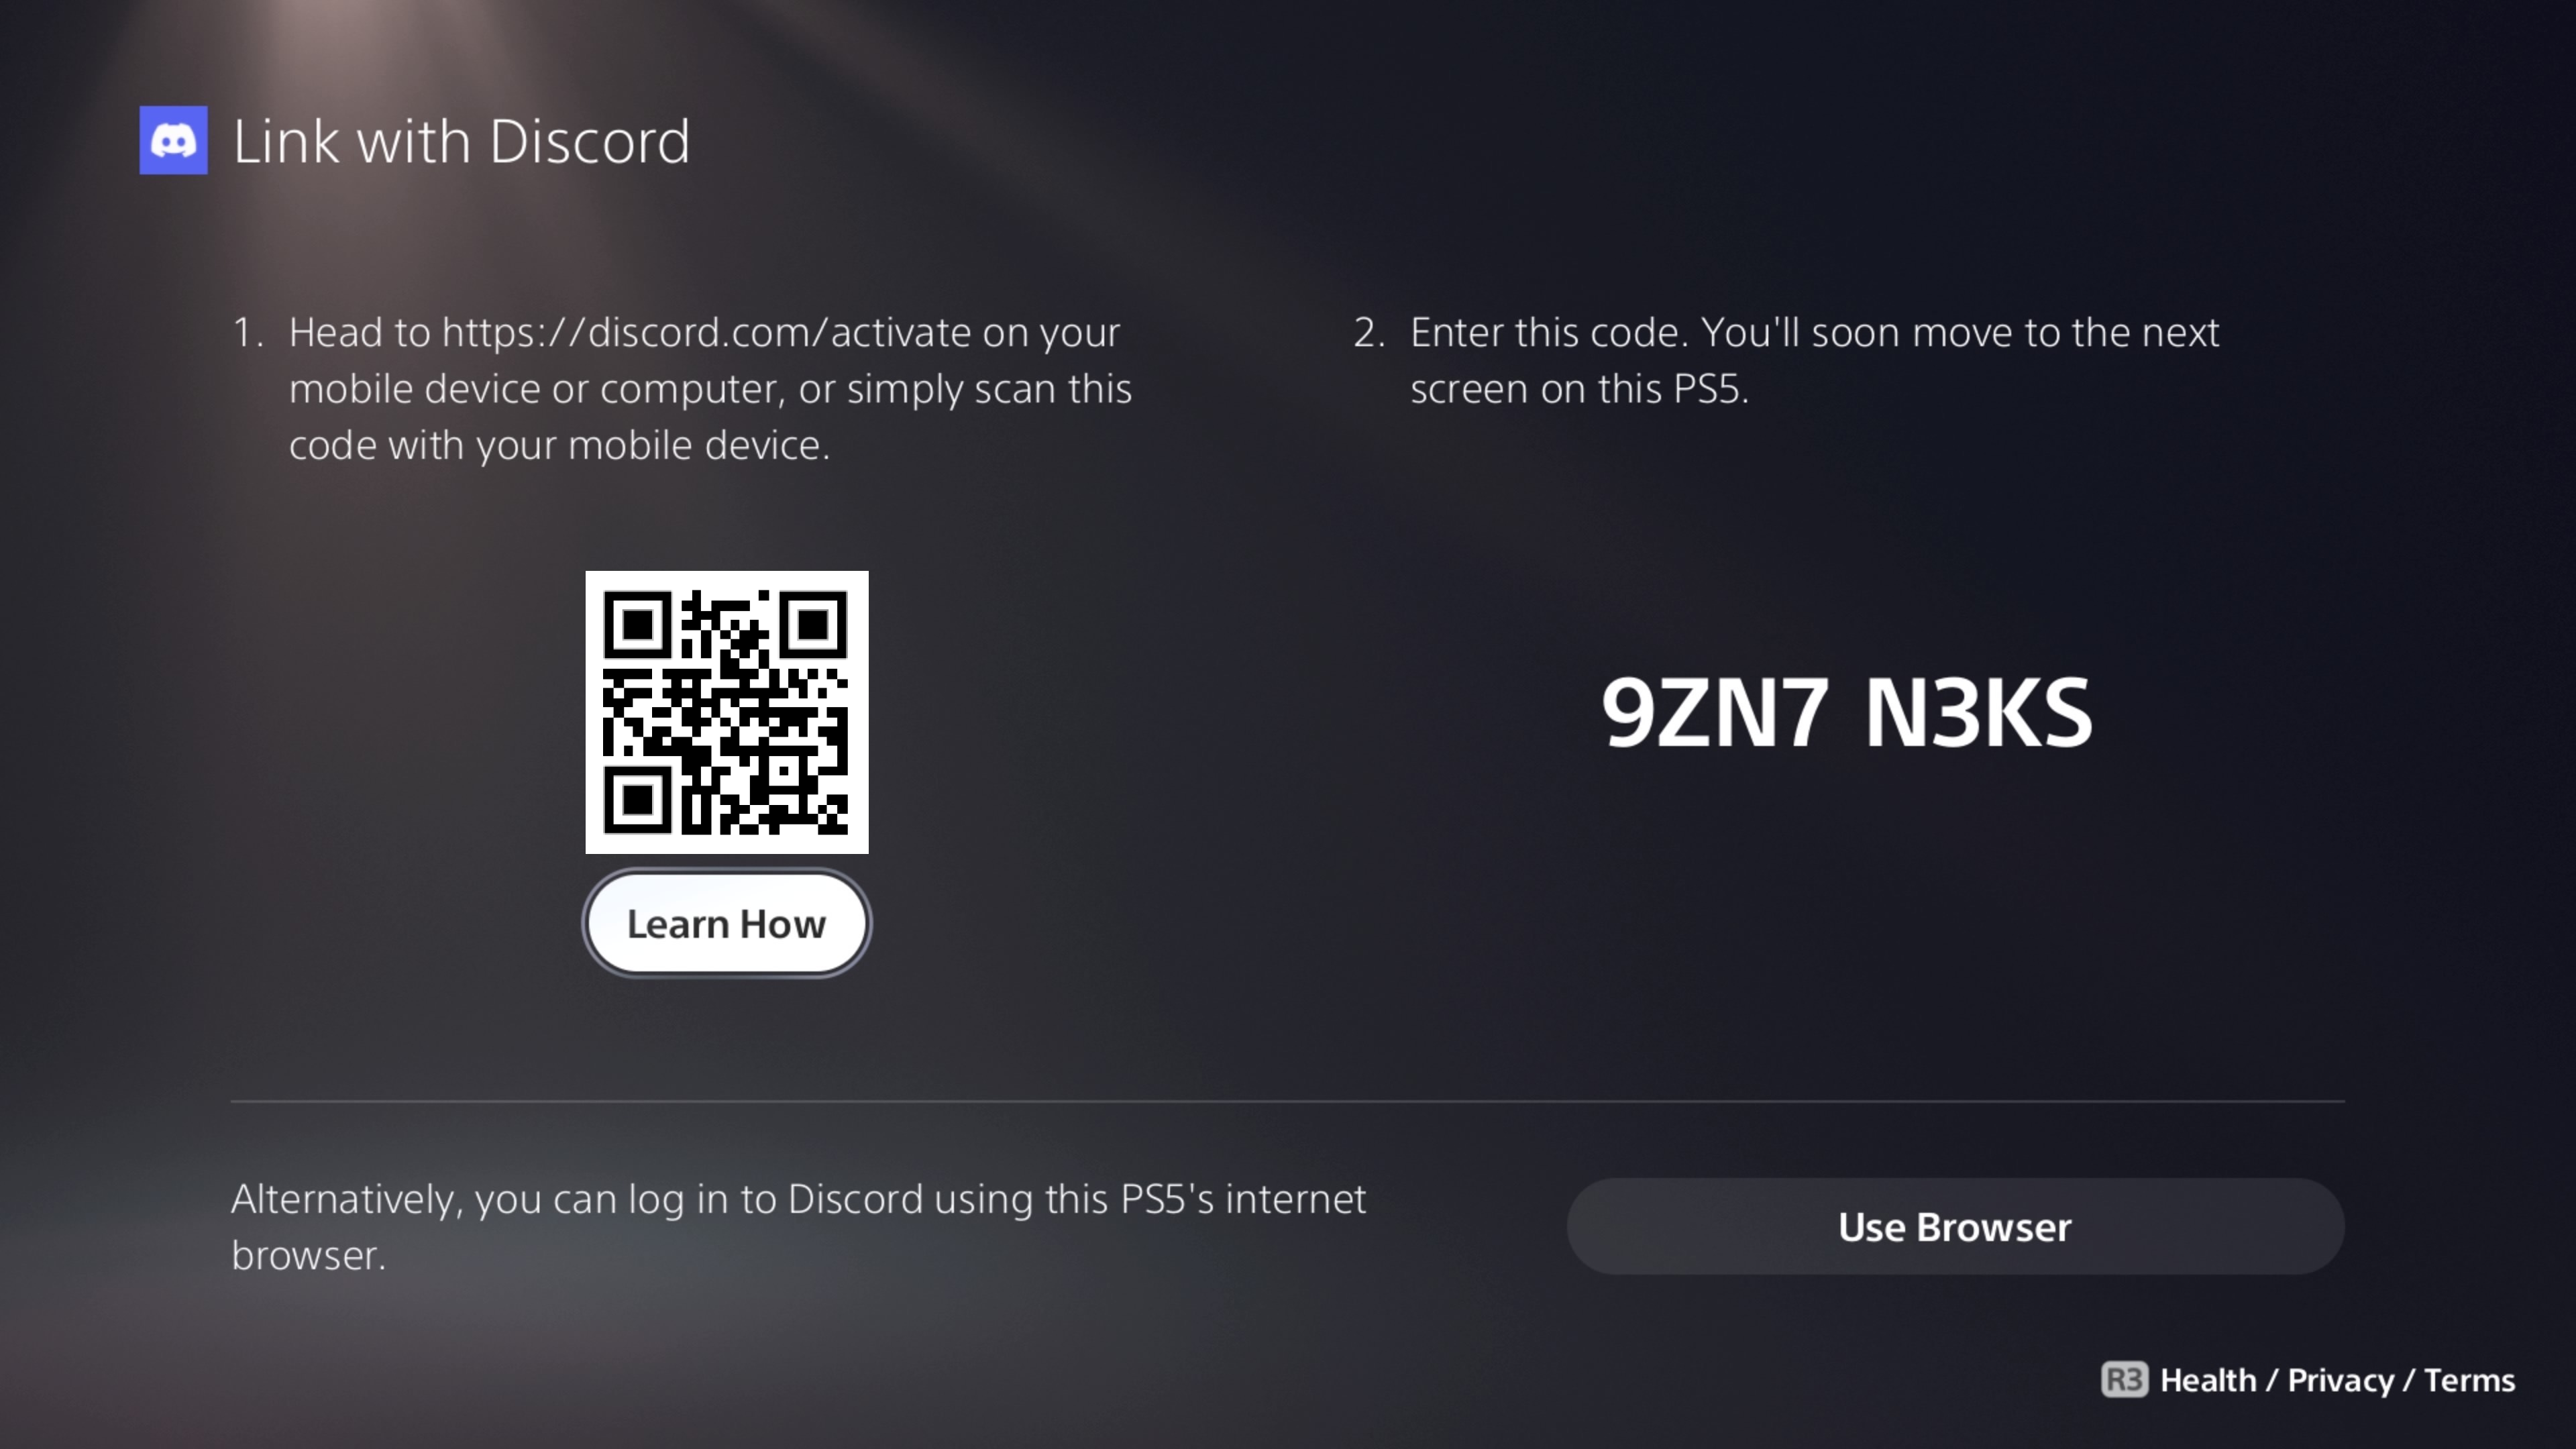 Discord On PS5: How To Accounts